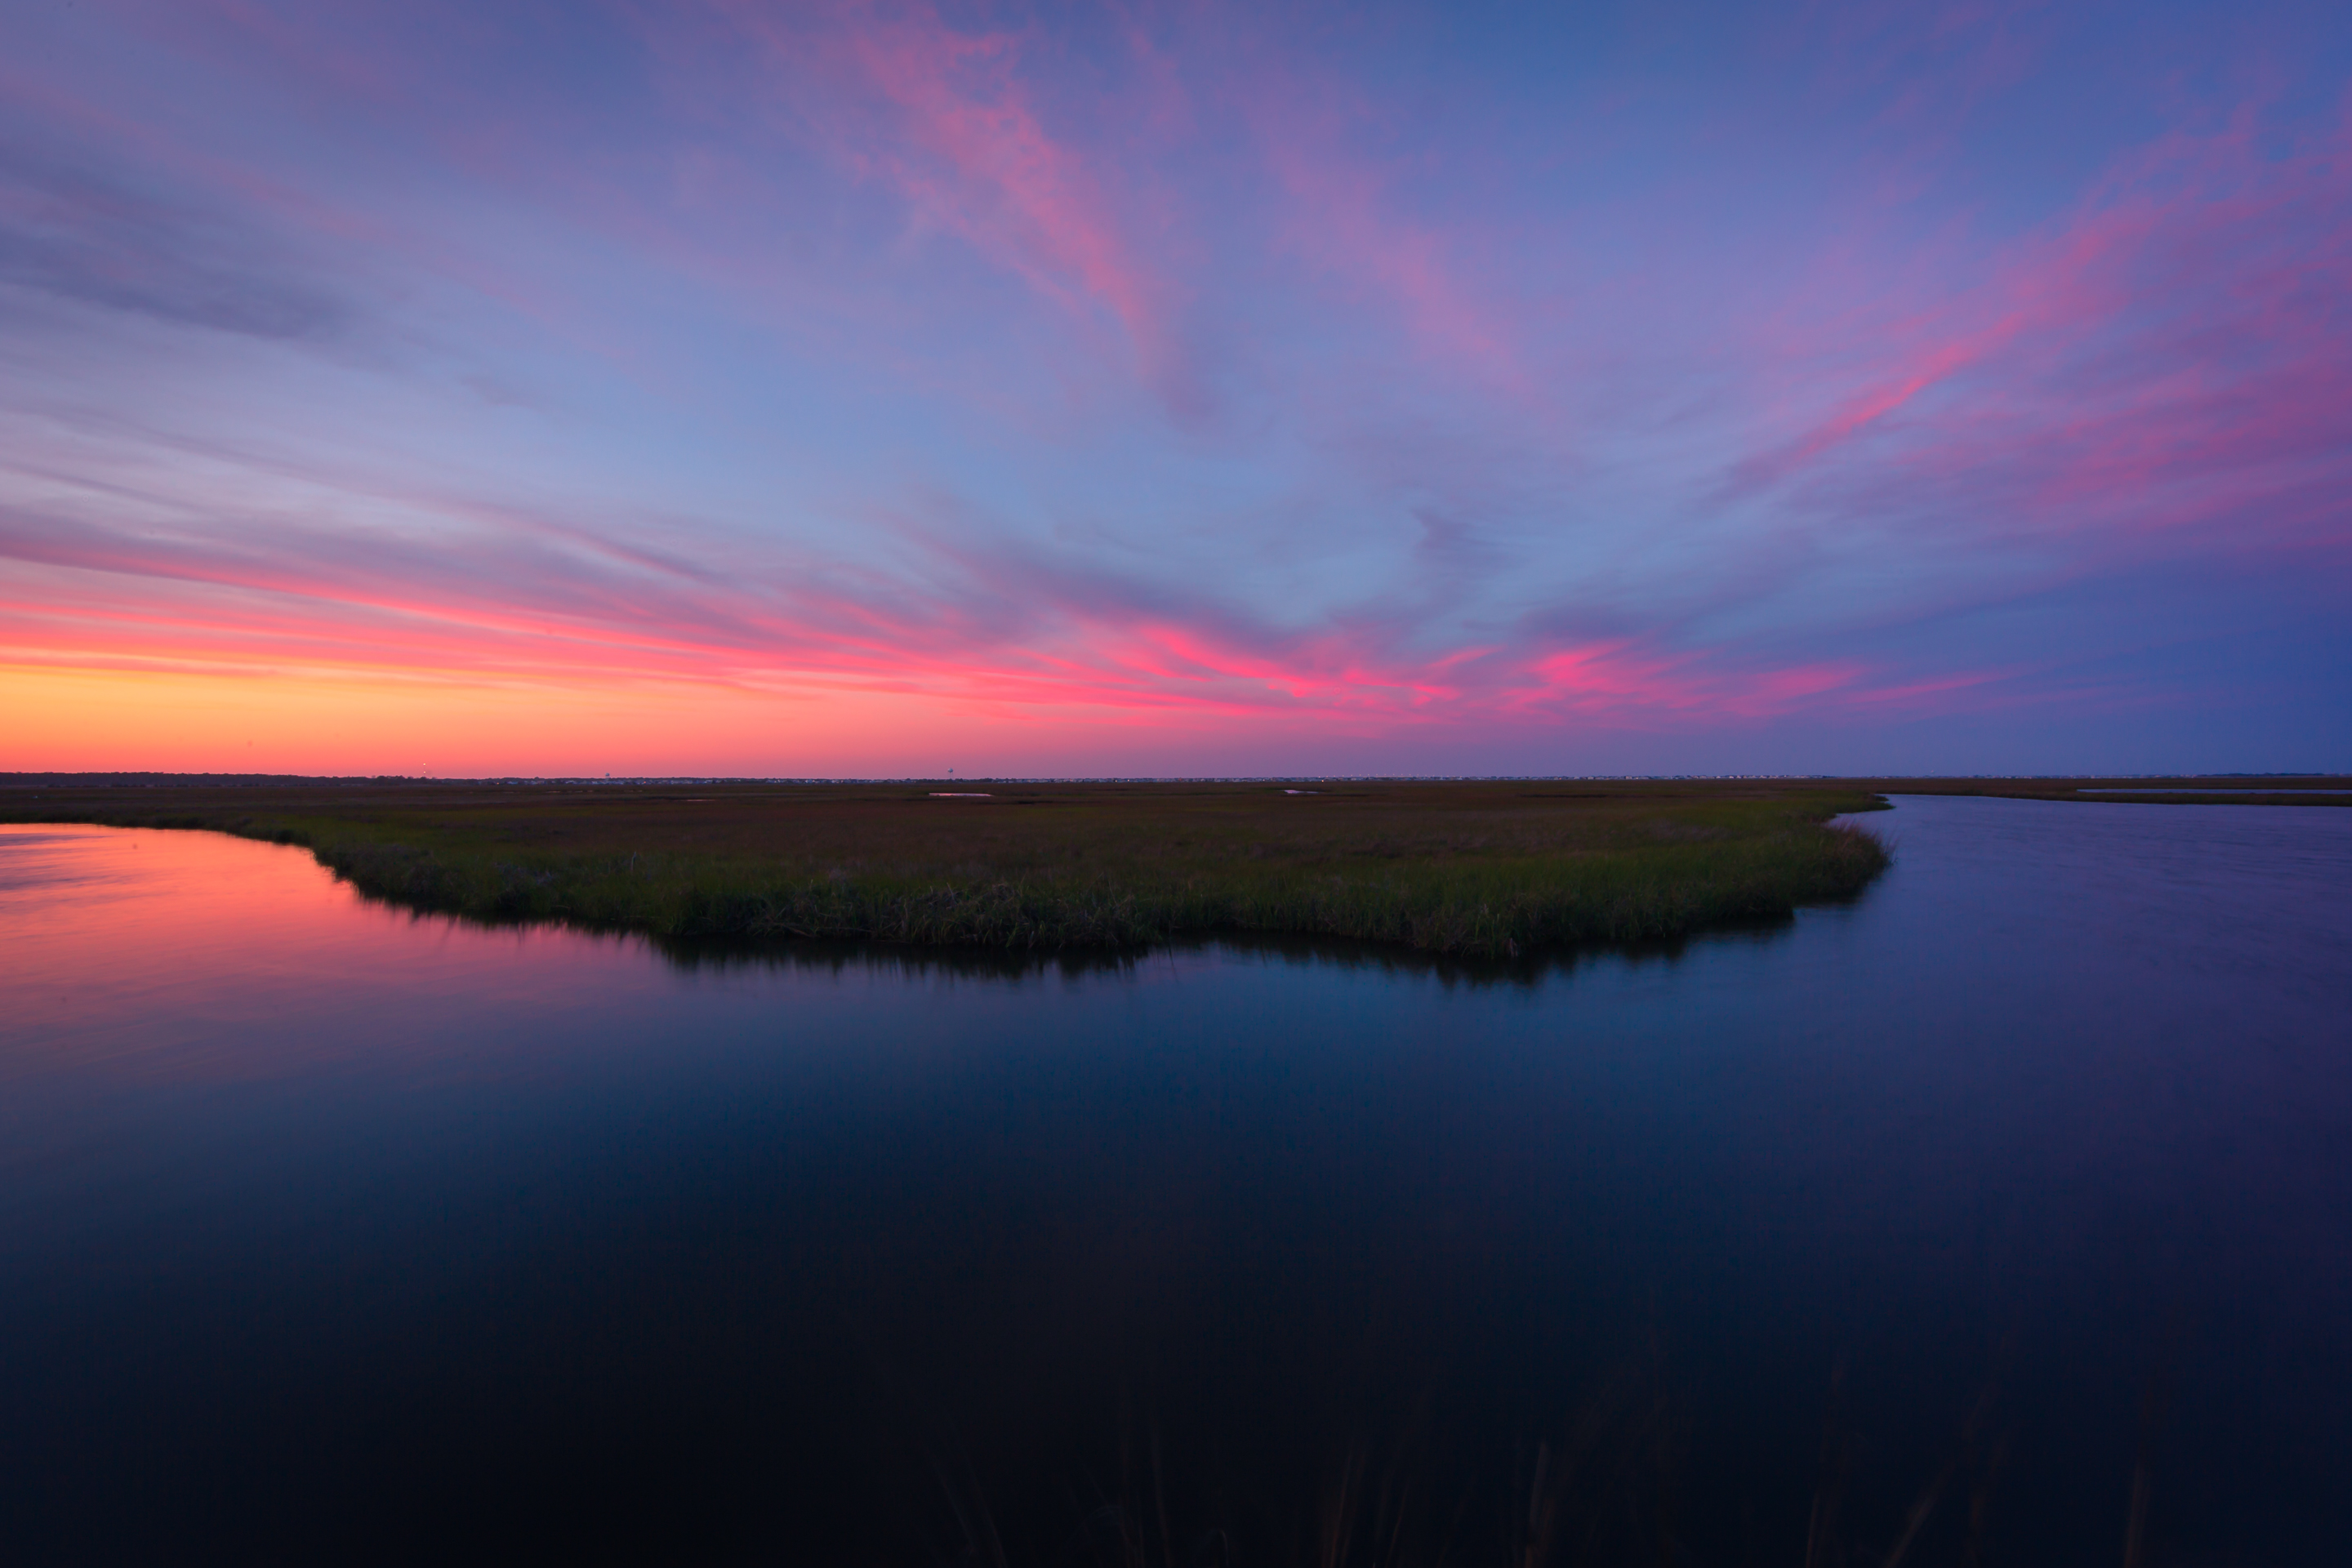 14mm wide angle landscape photo made low key at blue hour. Soft pastels color up the sky above an oxbow lake feature of the Cedar Run Dock Road salt marsh.